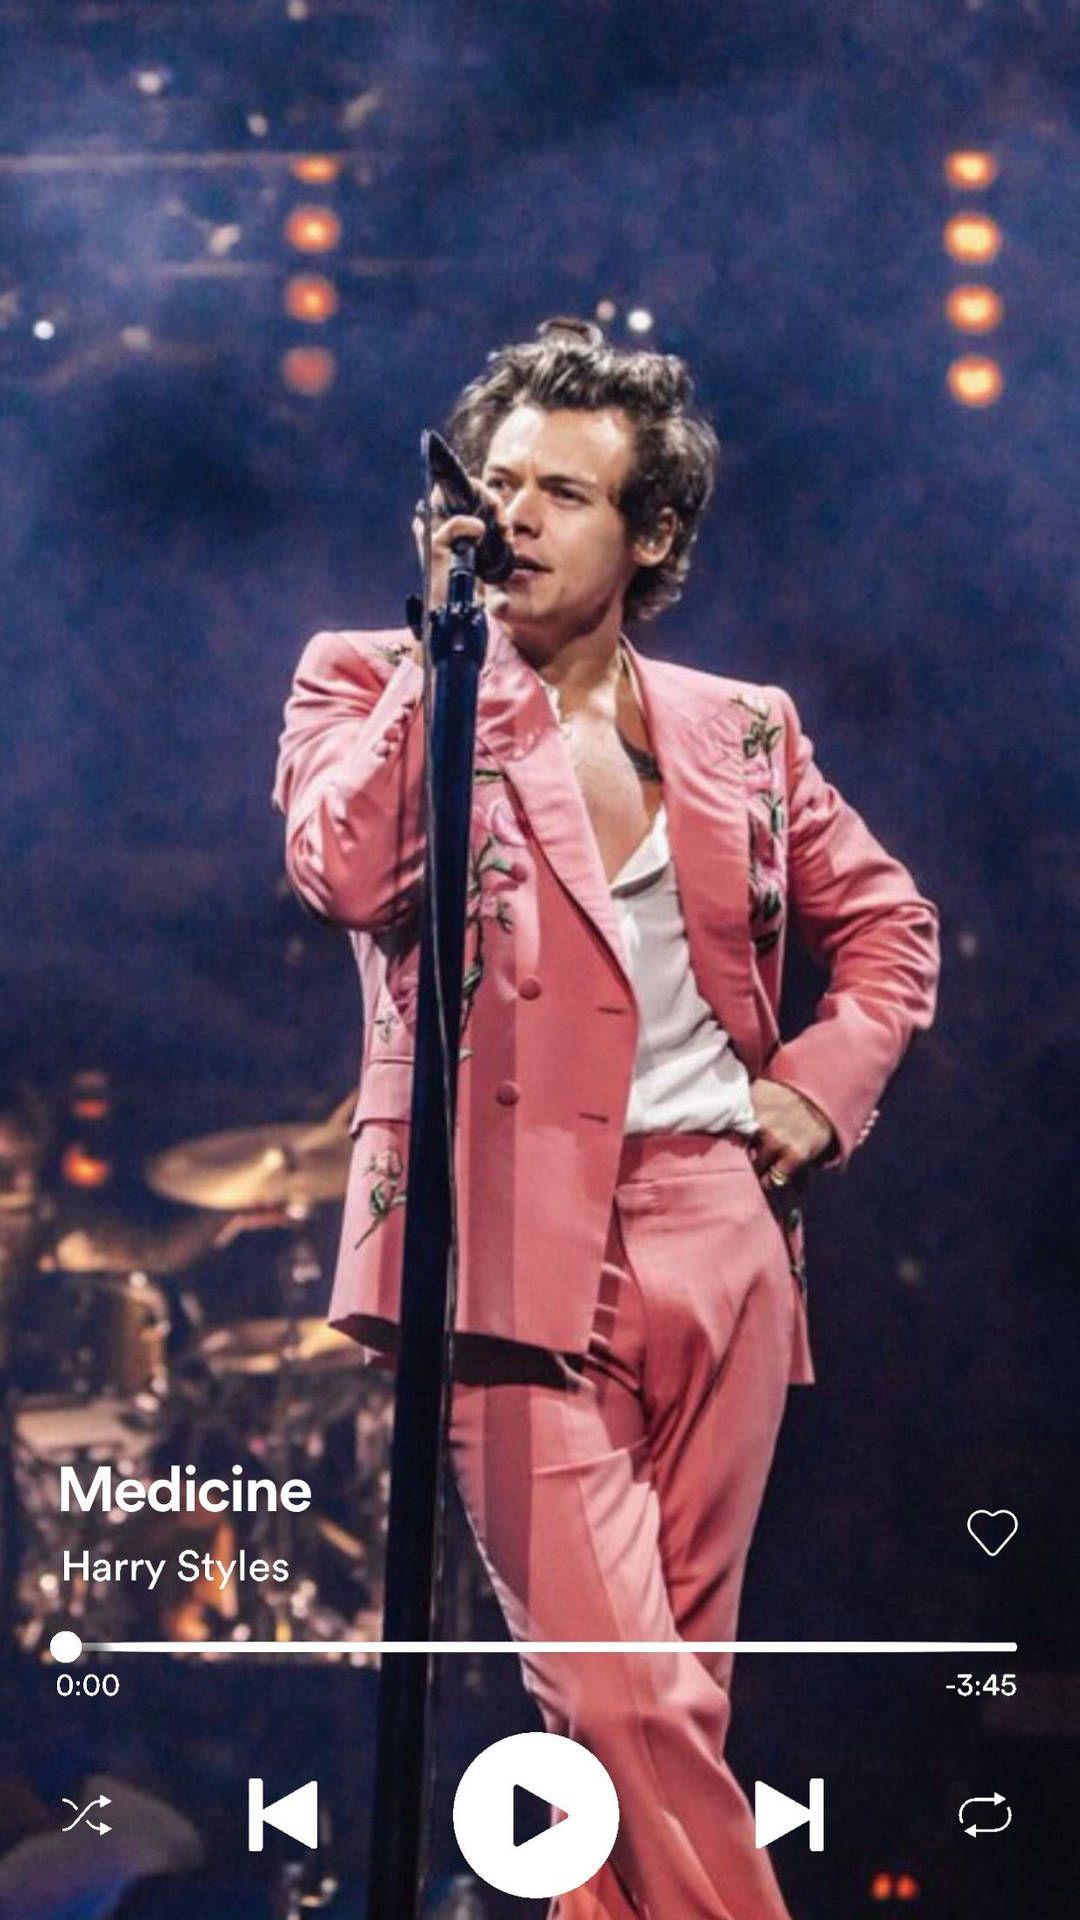 Harry Styles Medicine iPhone Wallpaper with high-resolution 1080x1920 pixel. You can use this wallpaper for your iPhone 5, 6, 7, 8, X, XS, XR backgrounds, Mobile Screensaver, or iPad Lock Screen - Harry Styles